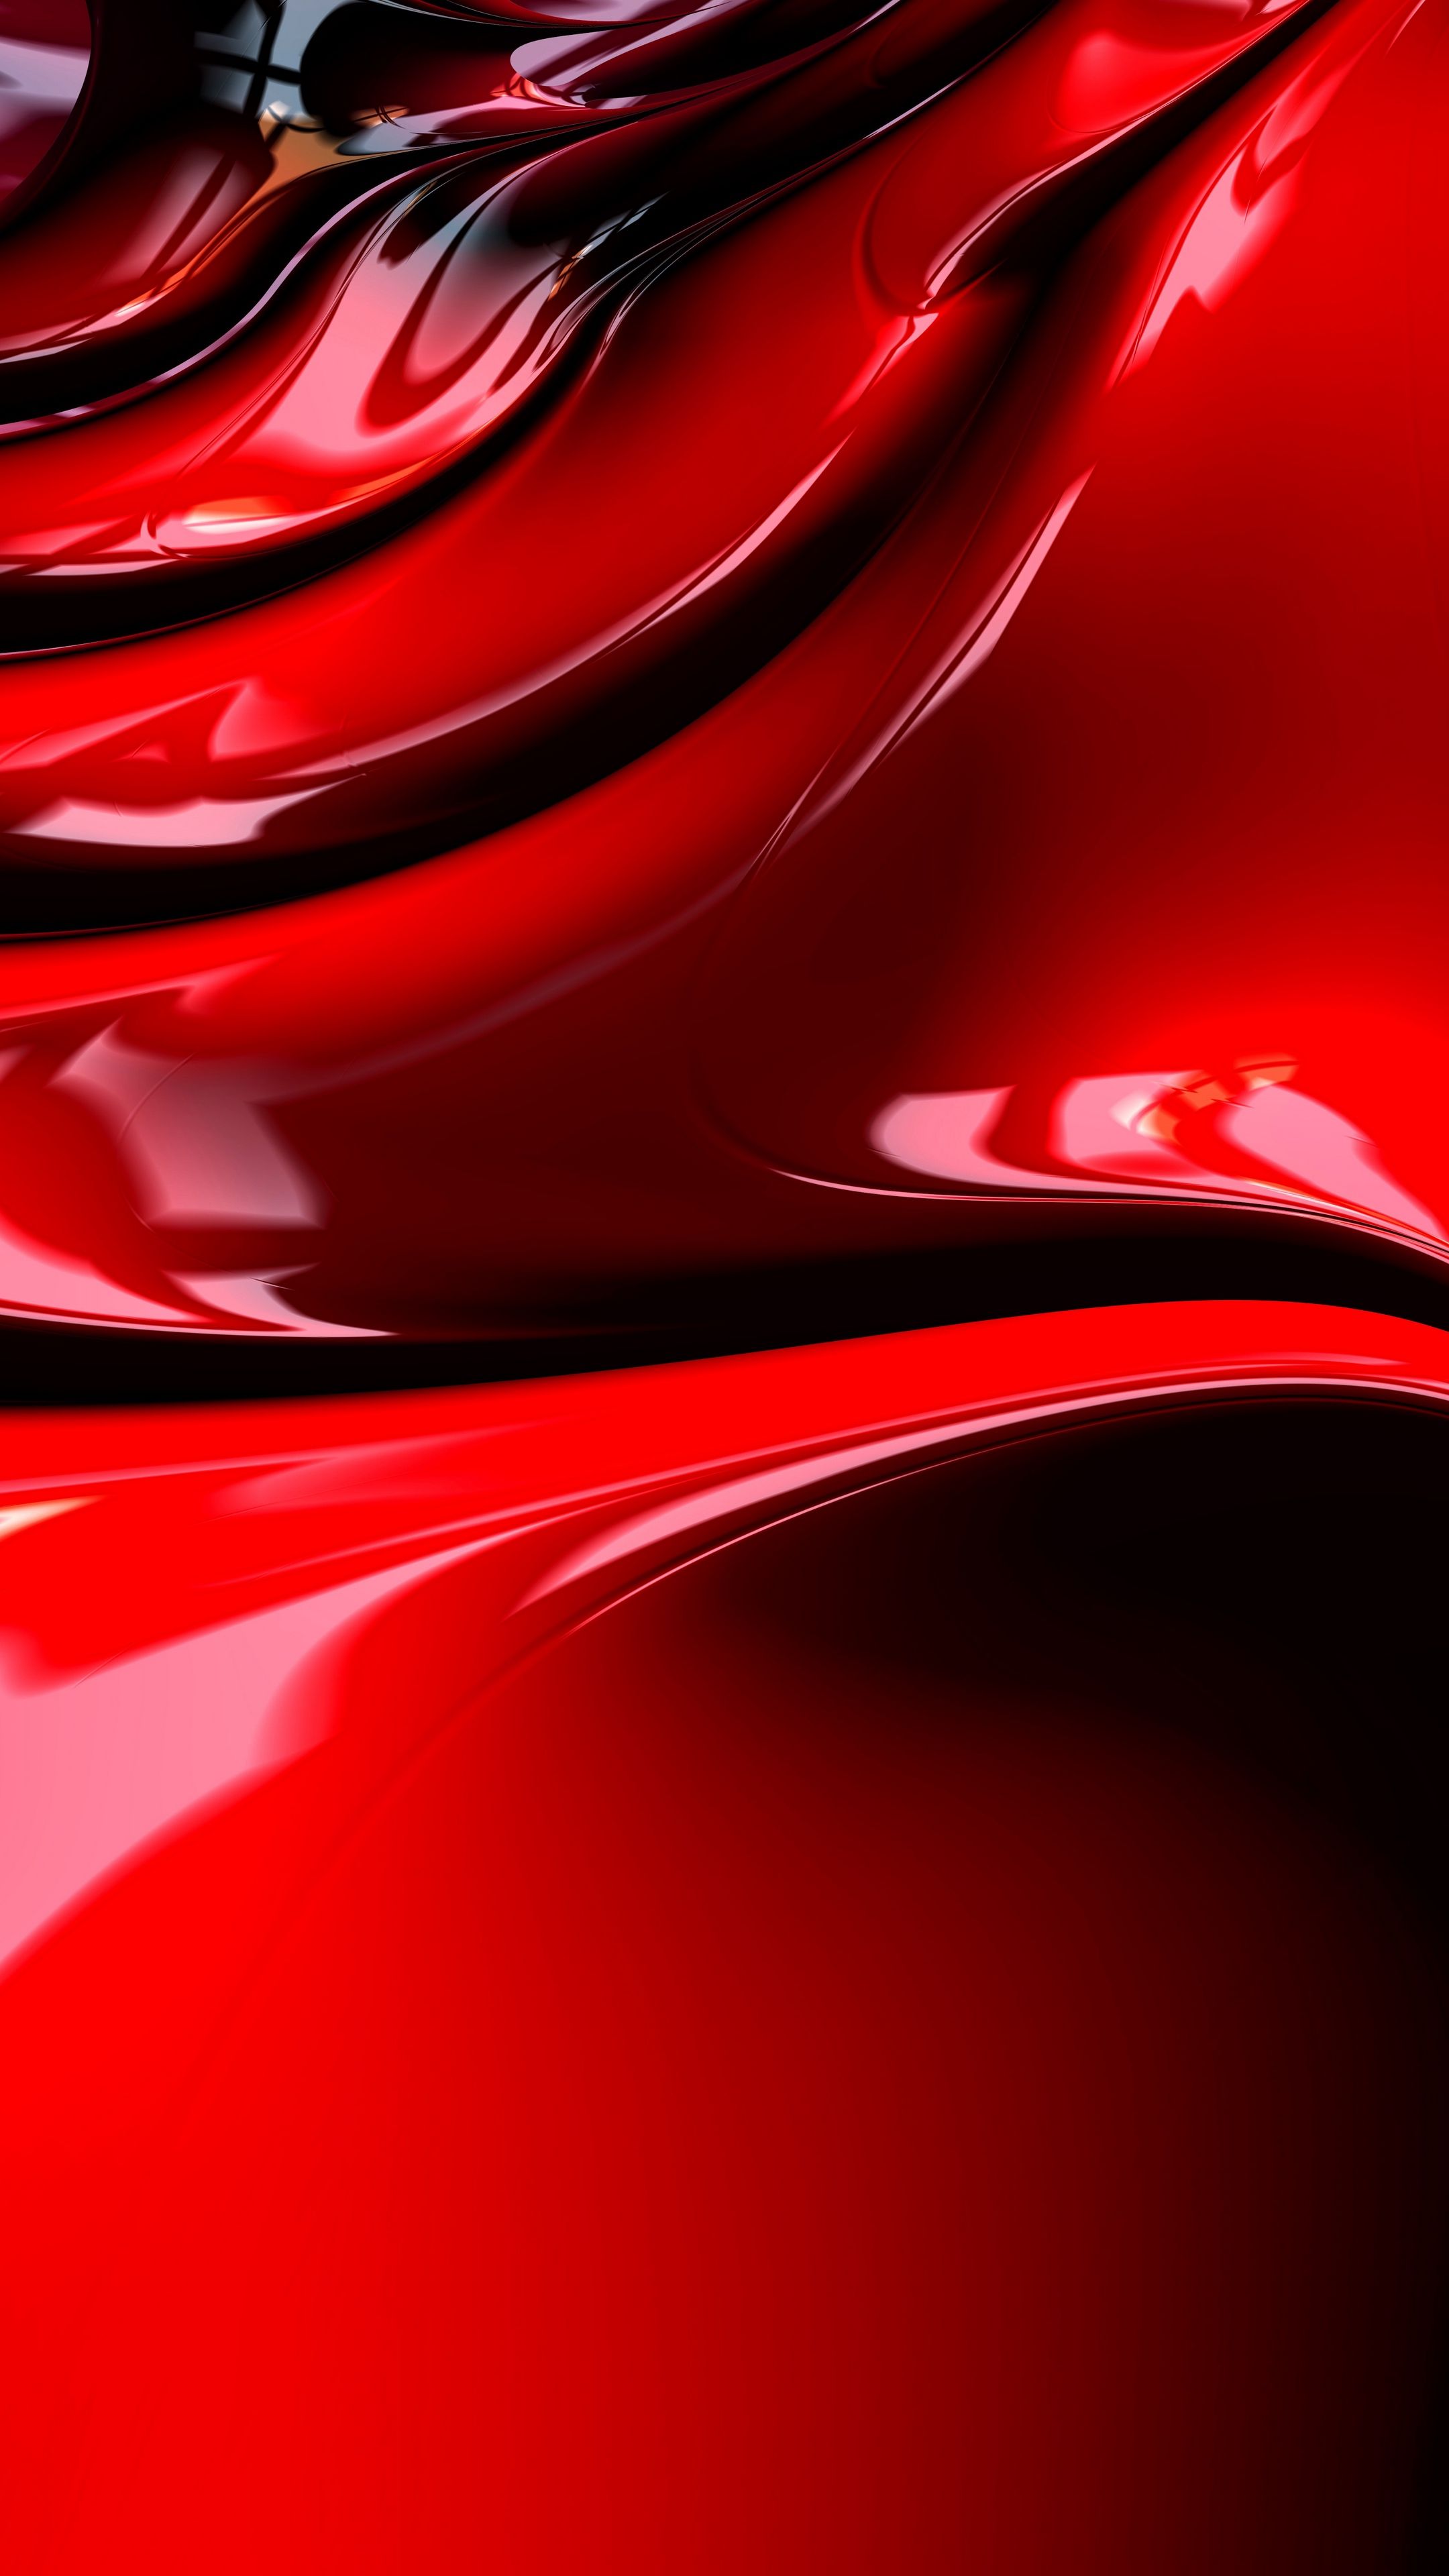 Abstract #fractal, #structure, #surface, #shape, #red #wallpaper HD 4k background for android :). Phone wallpaper, Red wallpaper, 1080p wallpaper